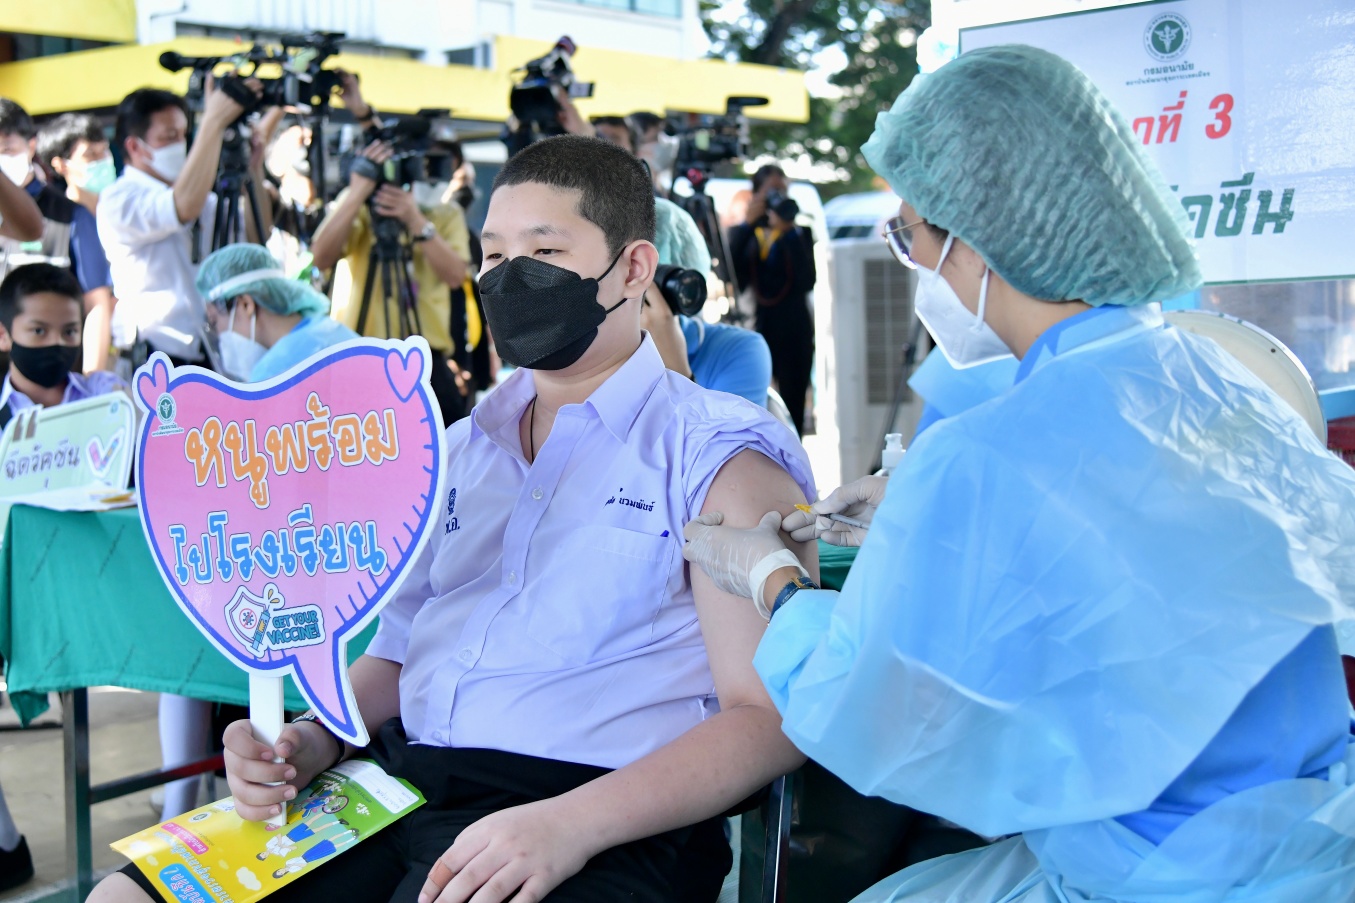 Bangkok Hospital Pattaya opens pre-registration Covid-19 vaccination service, limited to 200 people